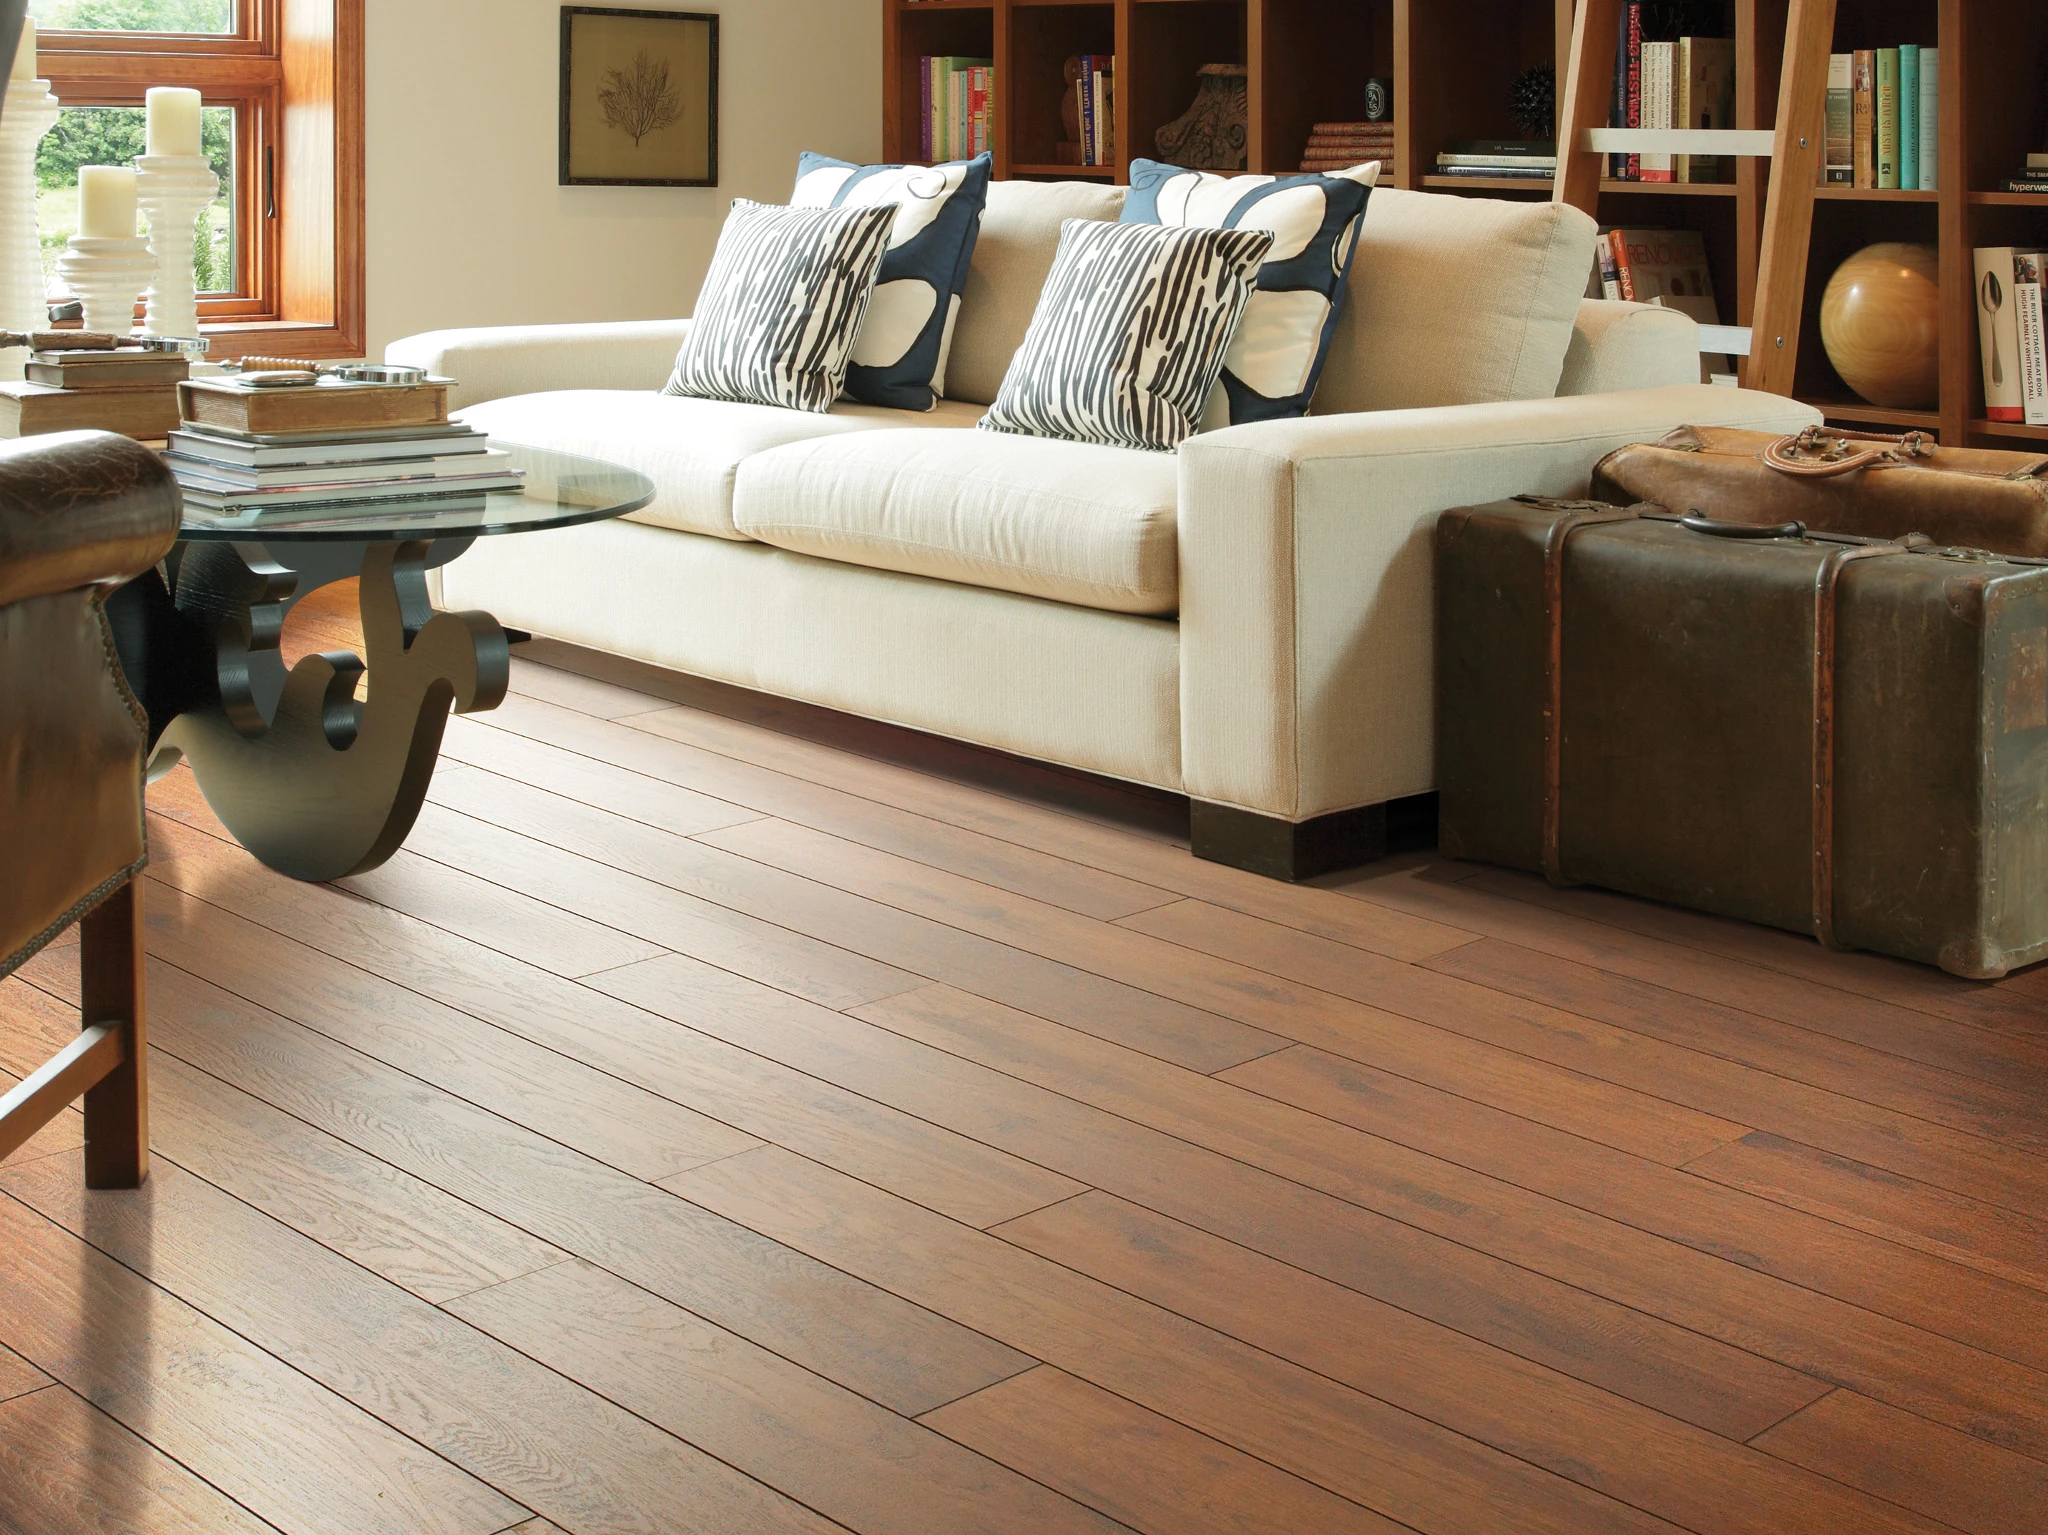 How To Clean Wood Laminate Flooring, Can You Use Wetjet On Laminate Floors